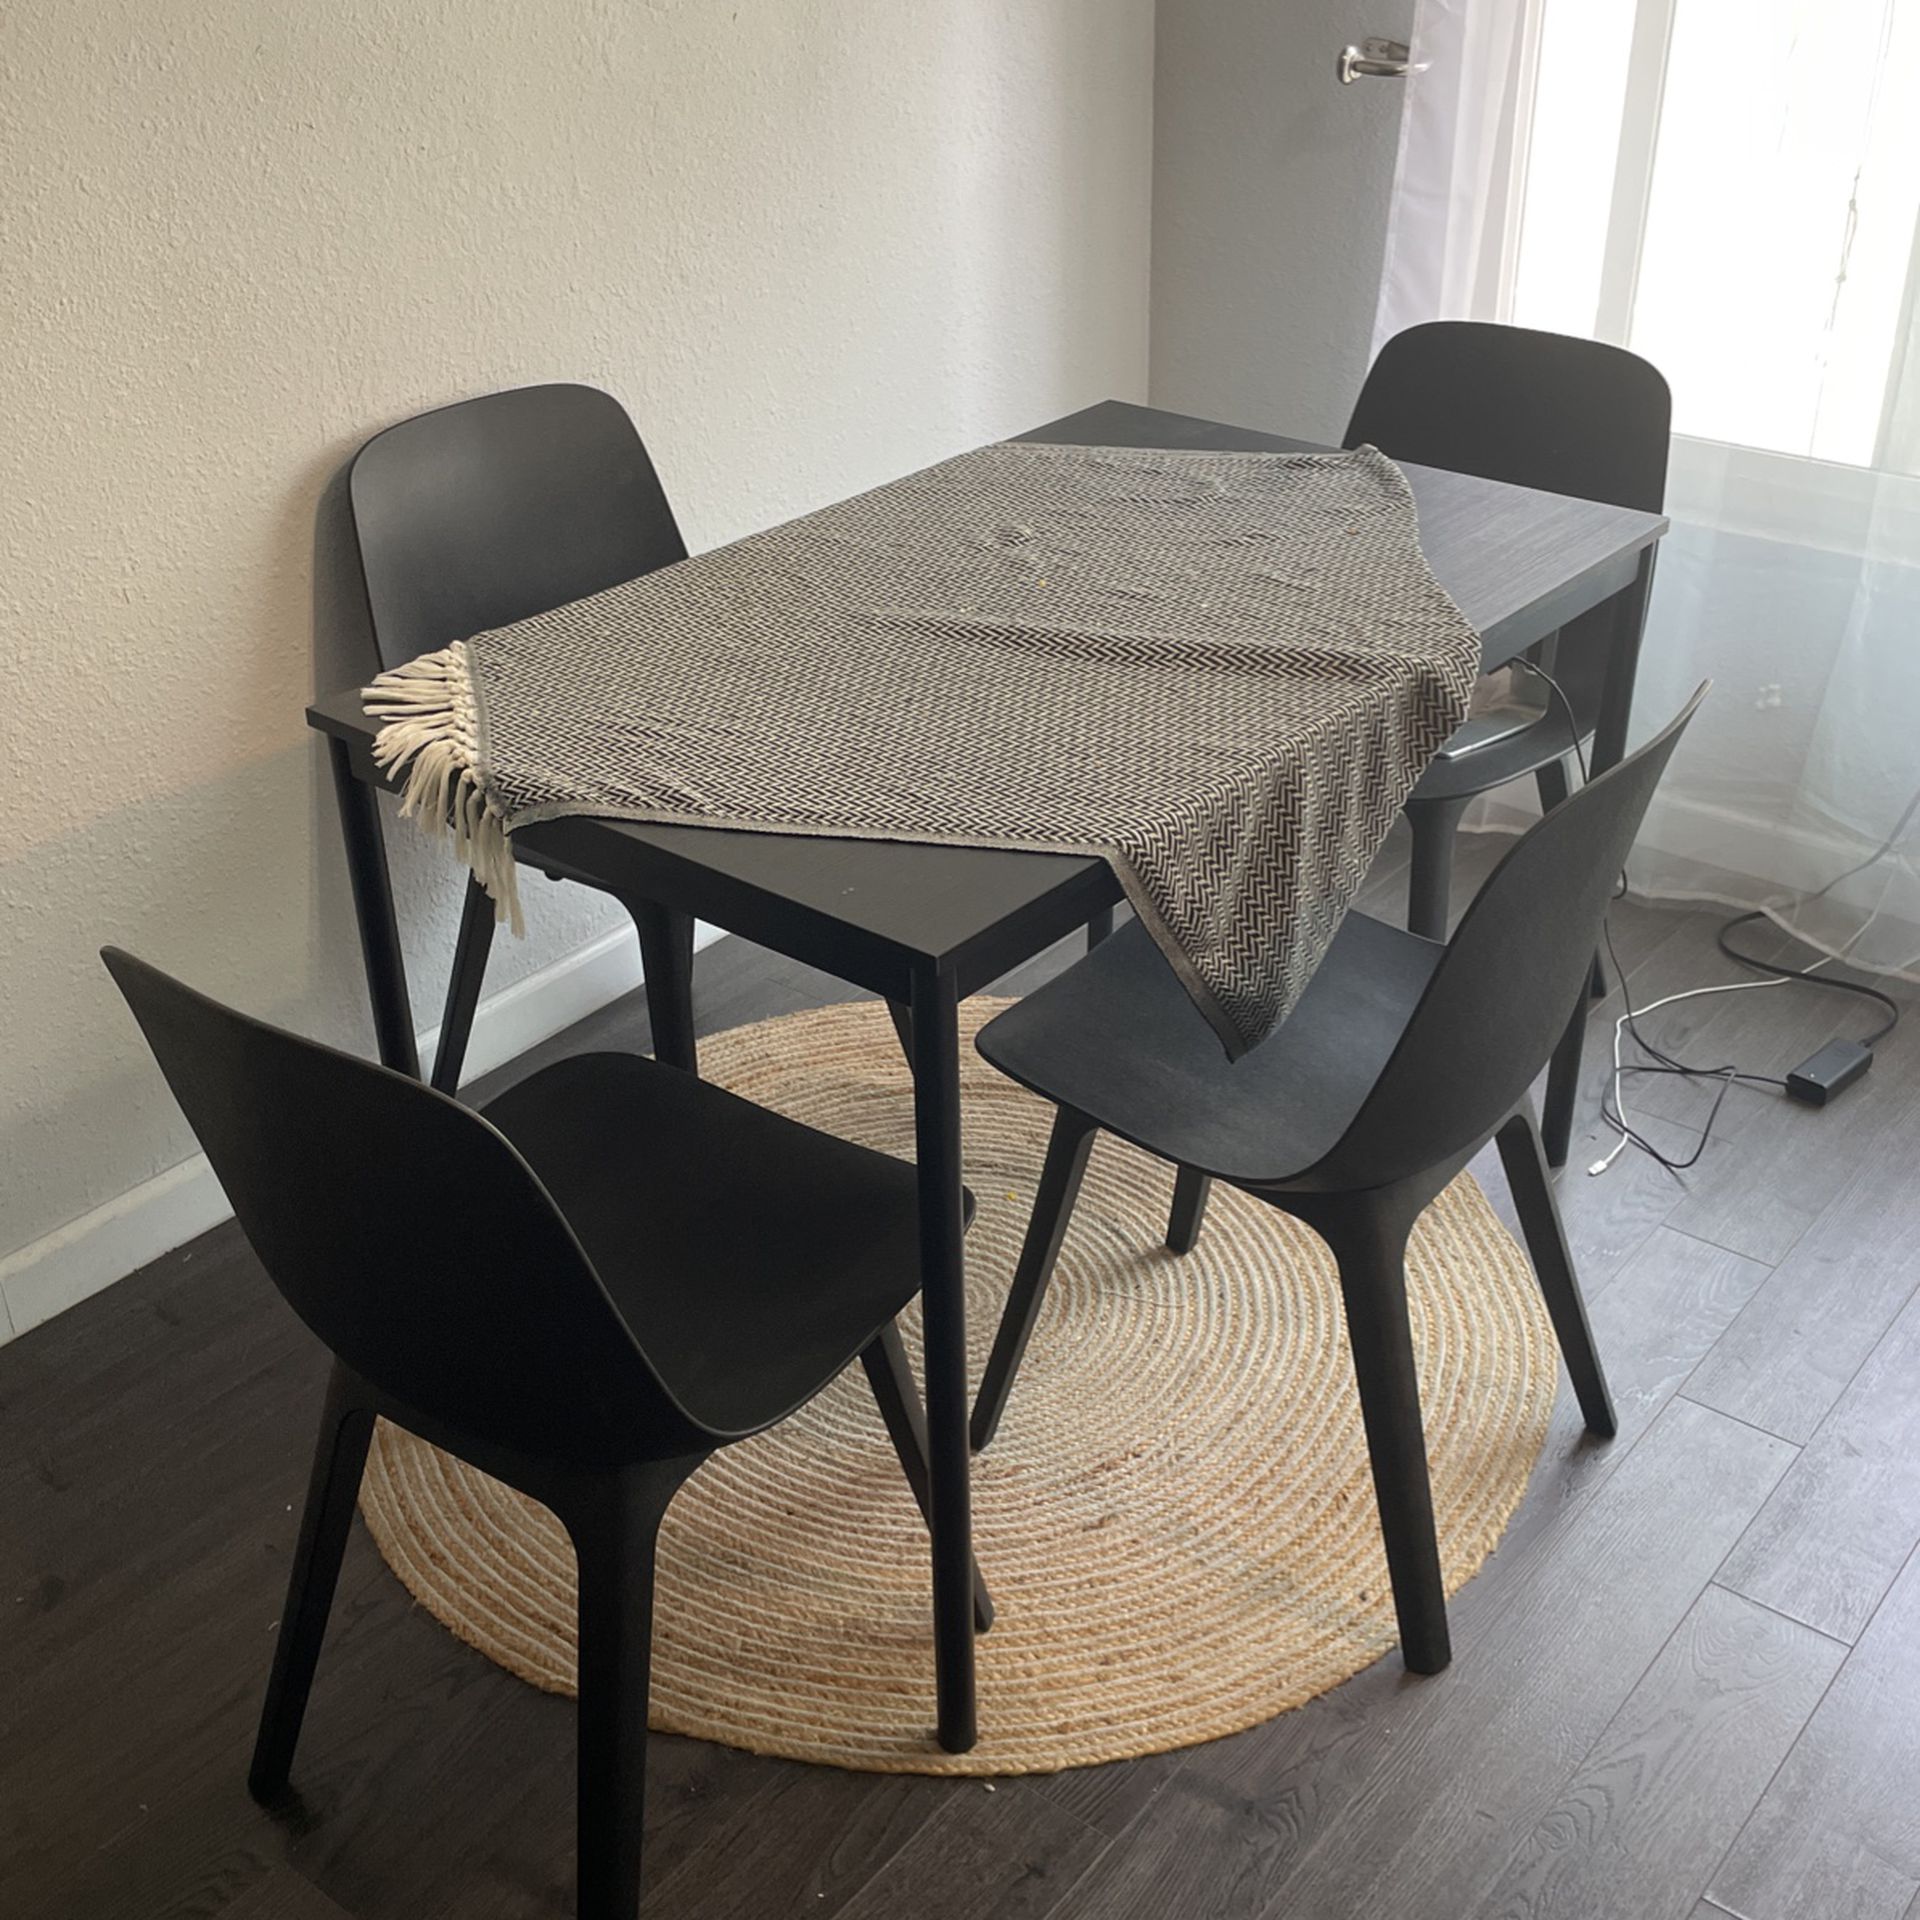 IKEA kitchen Table With 4 Chairs 